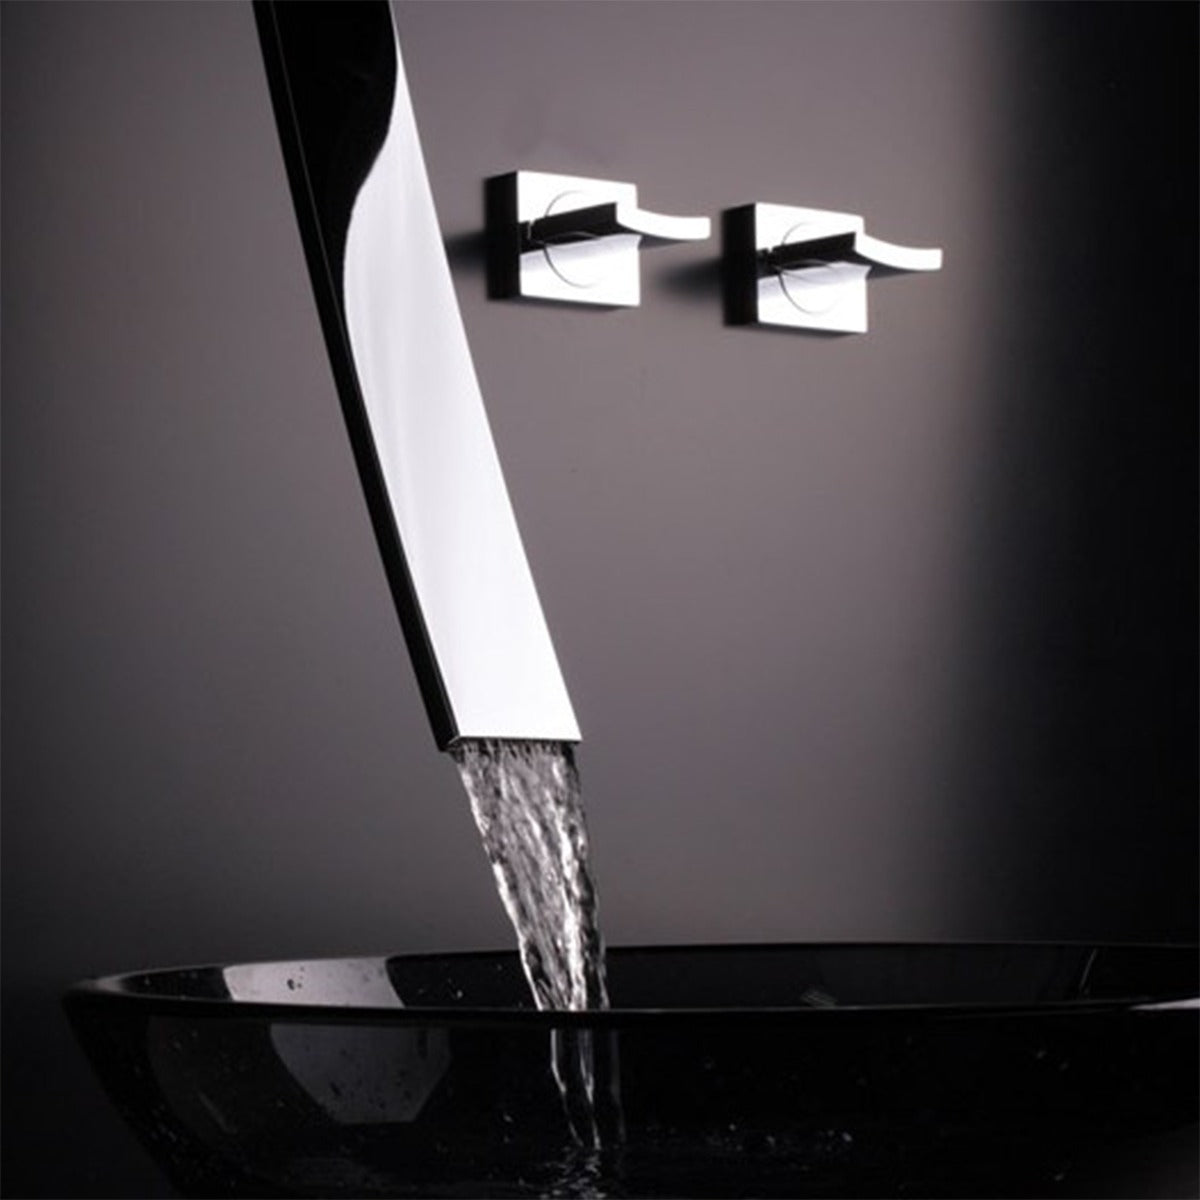 Graff Luna Wall Mounted Washbasin Spout with Concealed Basin Valves, Available in Polished Chrome and Satin Nickel. Please see order options.